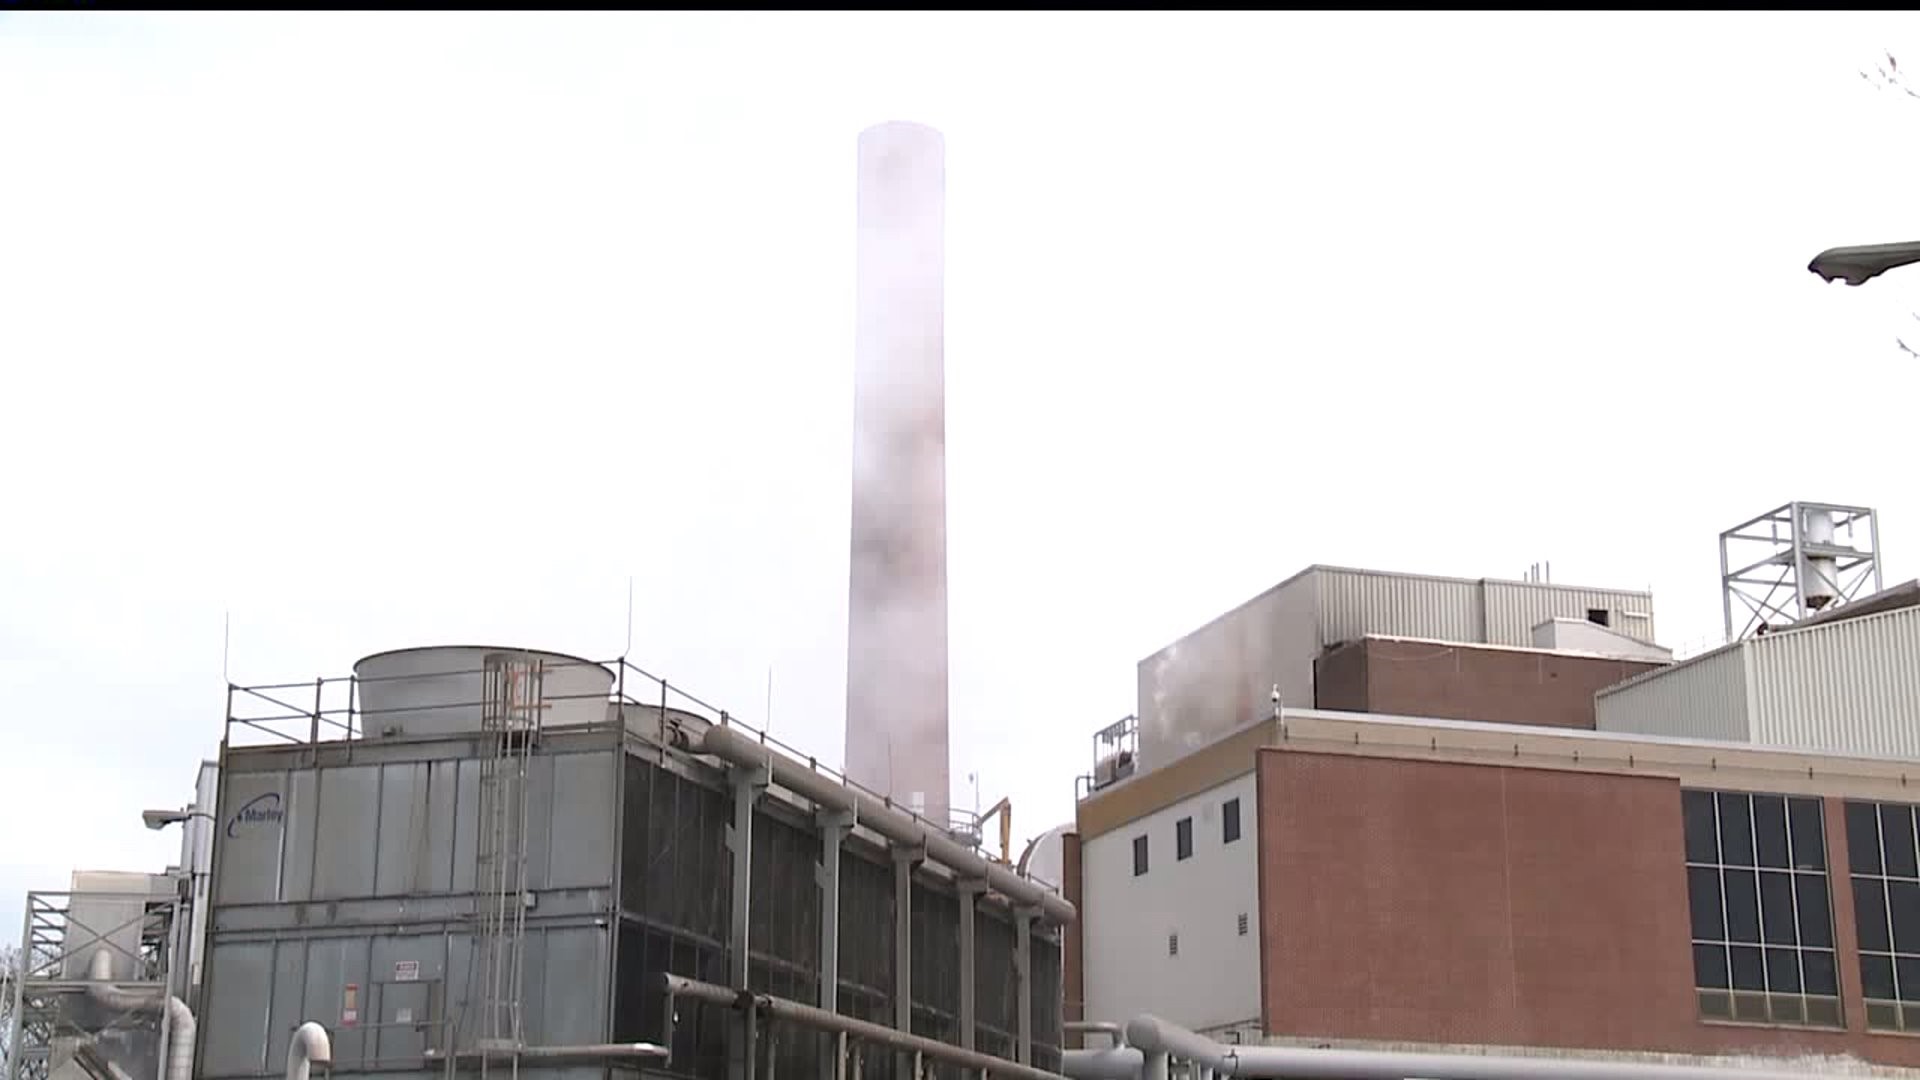 Pa. AG releases final report on grand jury investigation into Harrisburg incinerator